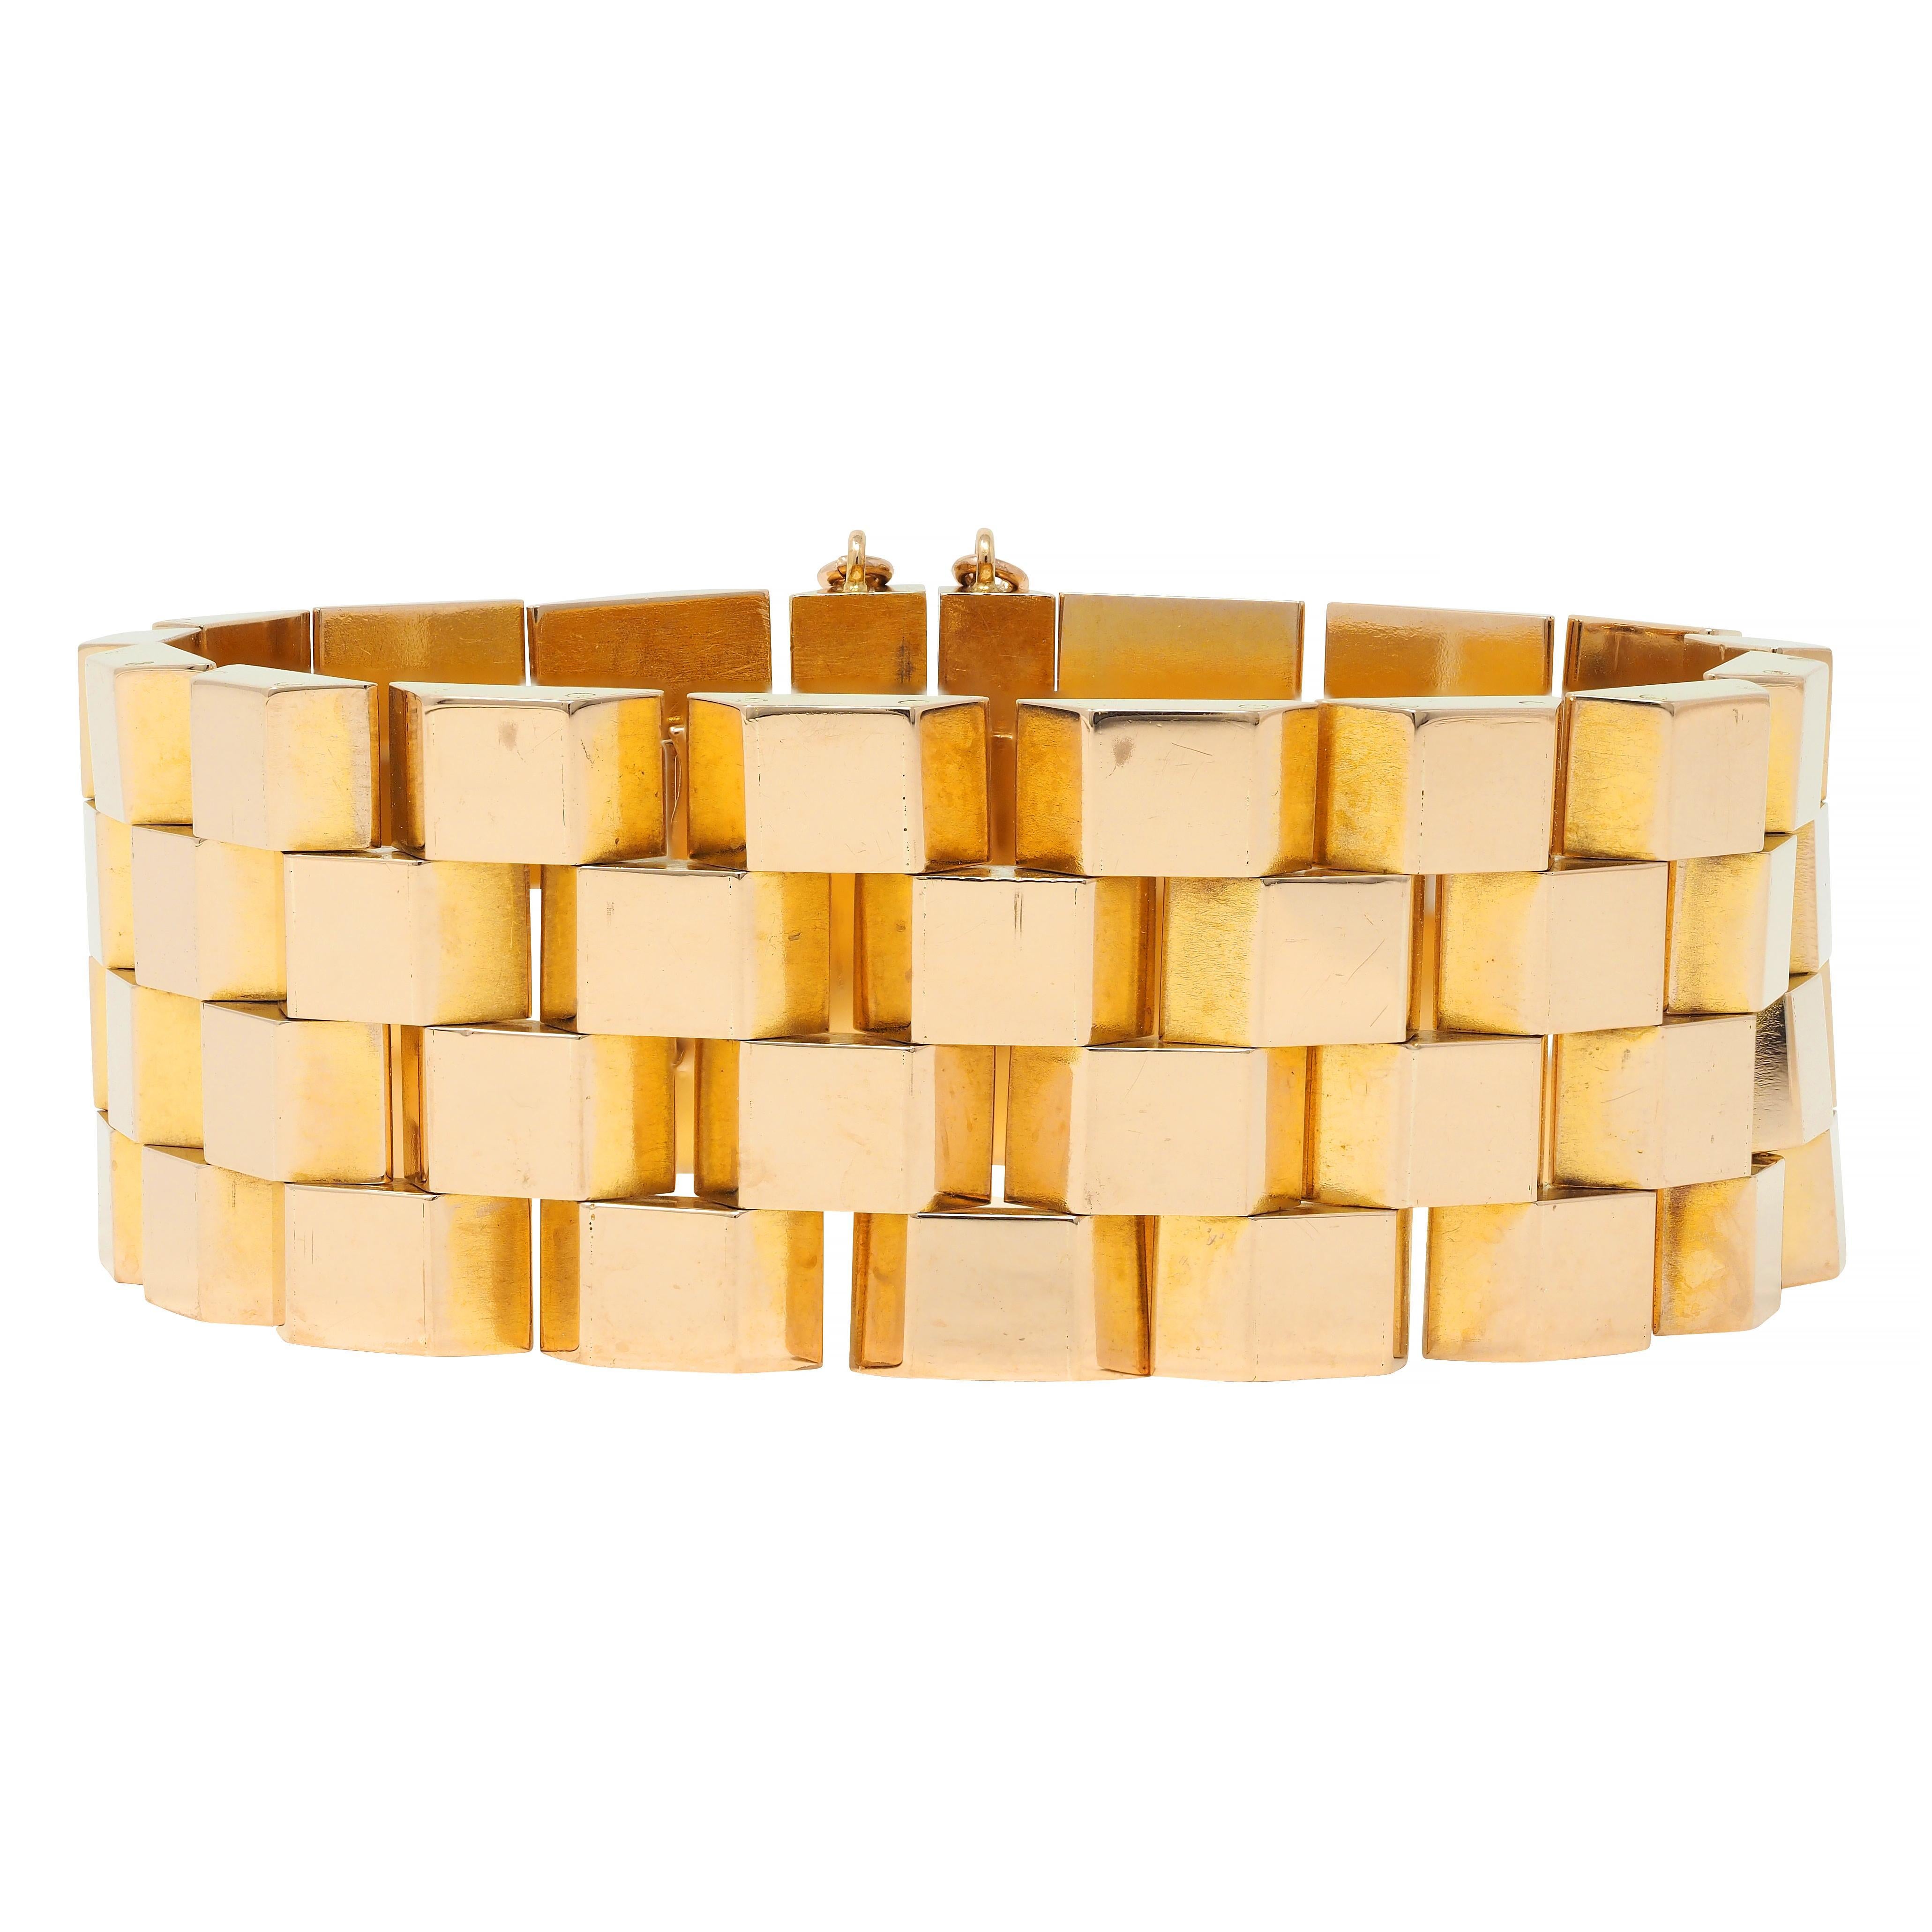 Comprise dog hinged panther style links
Geometric with faceted edges 
With high polish finish
Completed by concealed closure with safety chain 
Tested with partial French hallmarks for 18 karat gold
Circa: 1960s
Width at widest: 7/8 inch
Bracelet